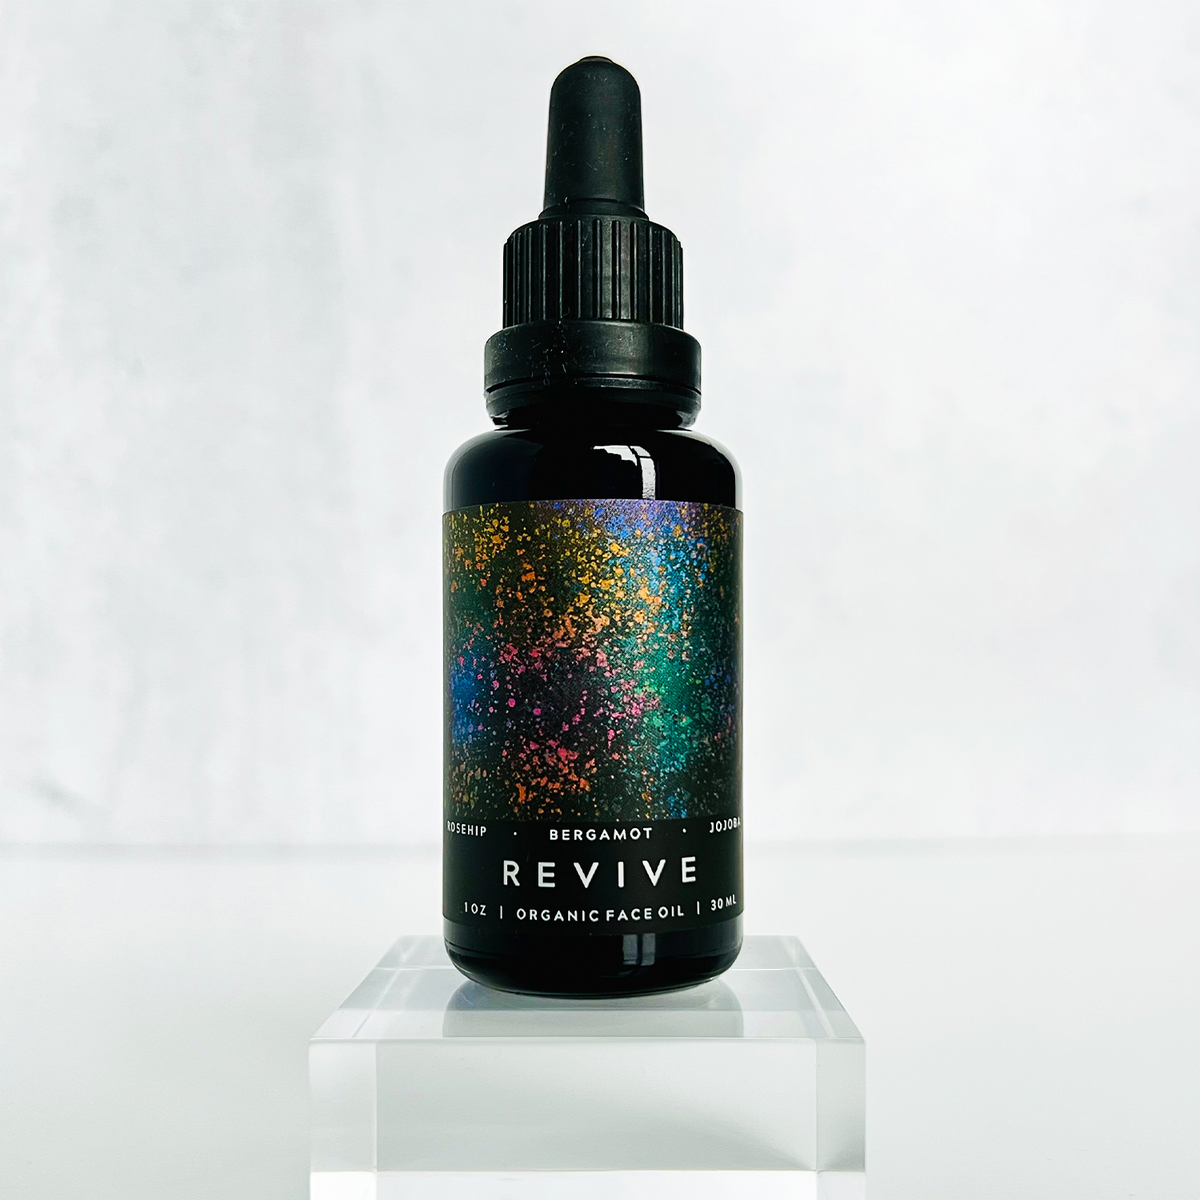 REVIVE Organic Face Oil design facing with lid